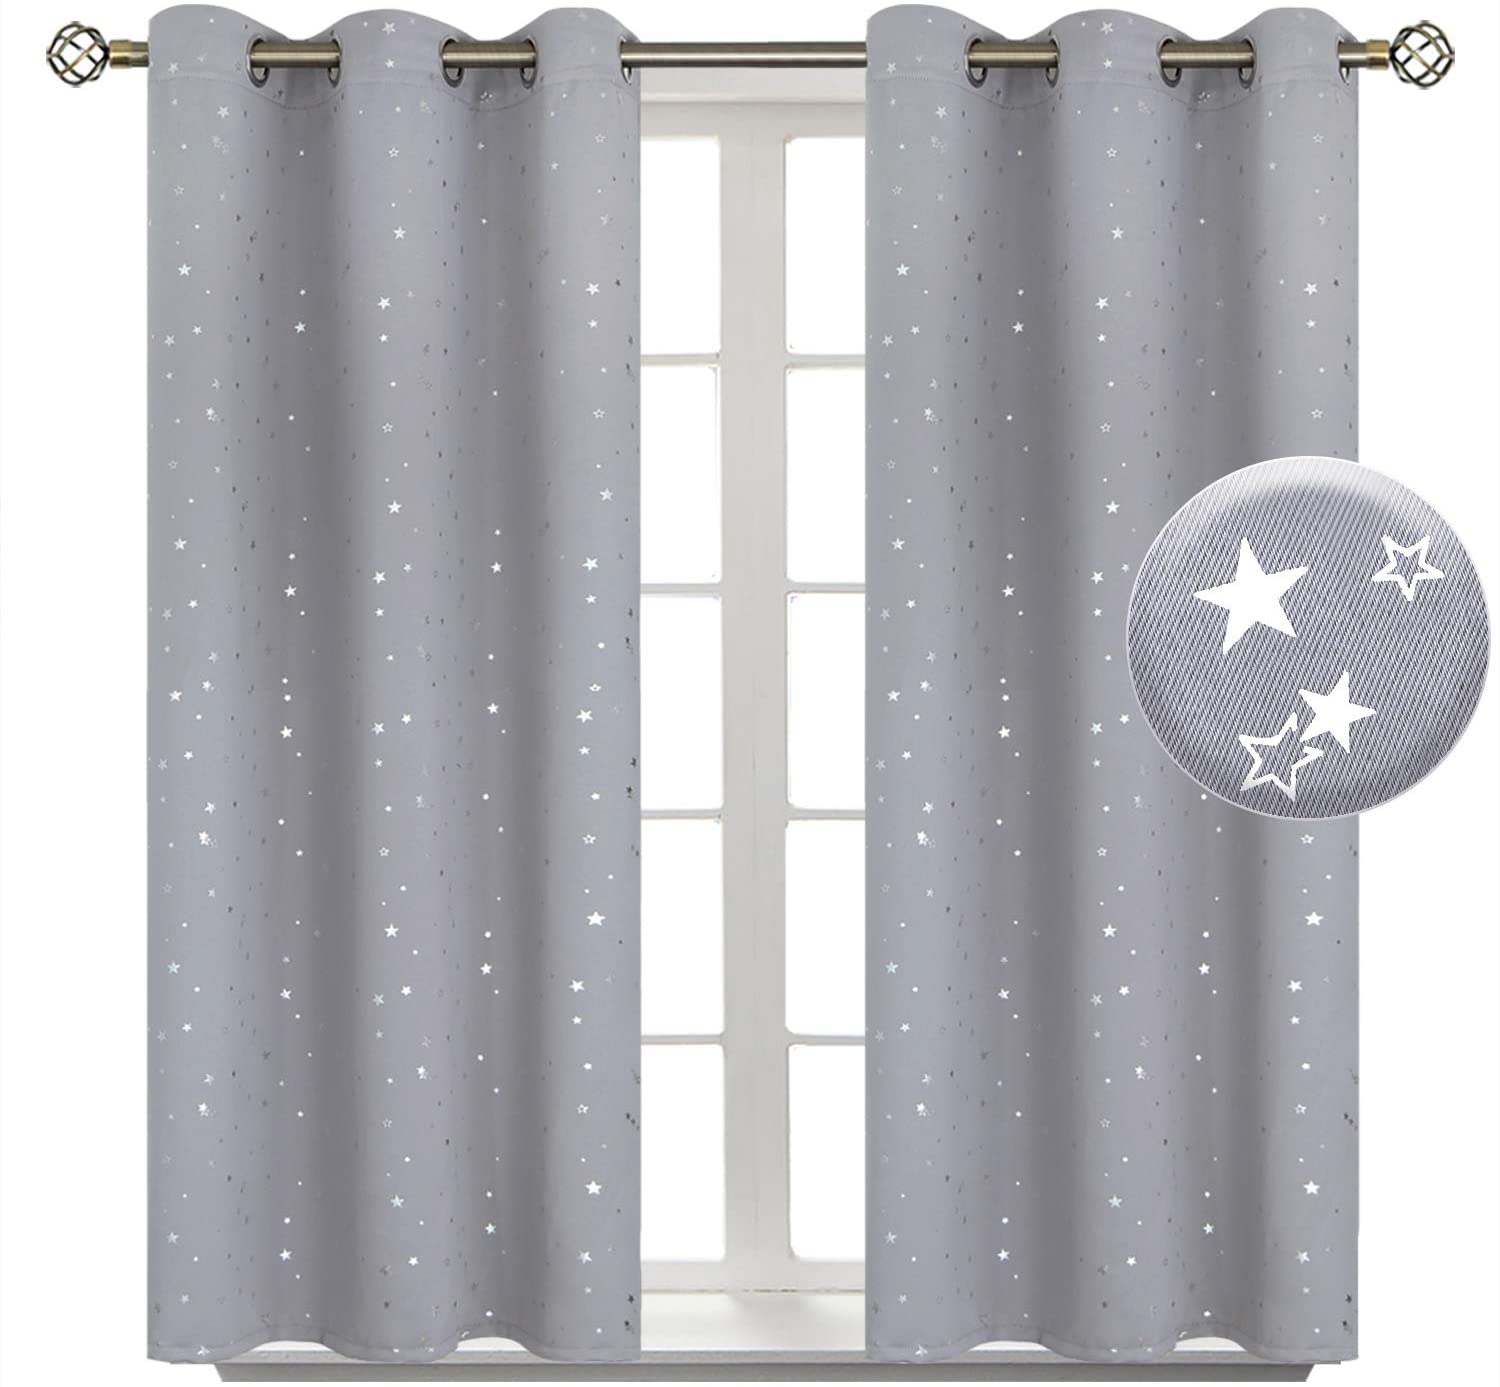 Details about   BGment Navy Star Blackout Curtains for Kid's Bedroom Grommet Thermal Insulated 